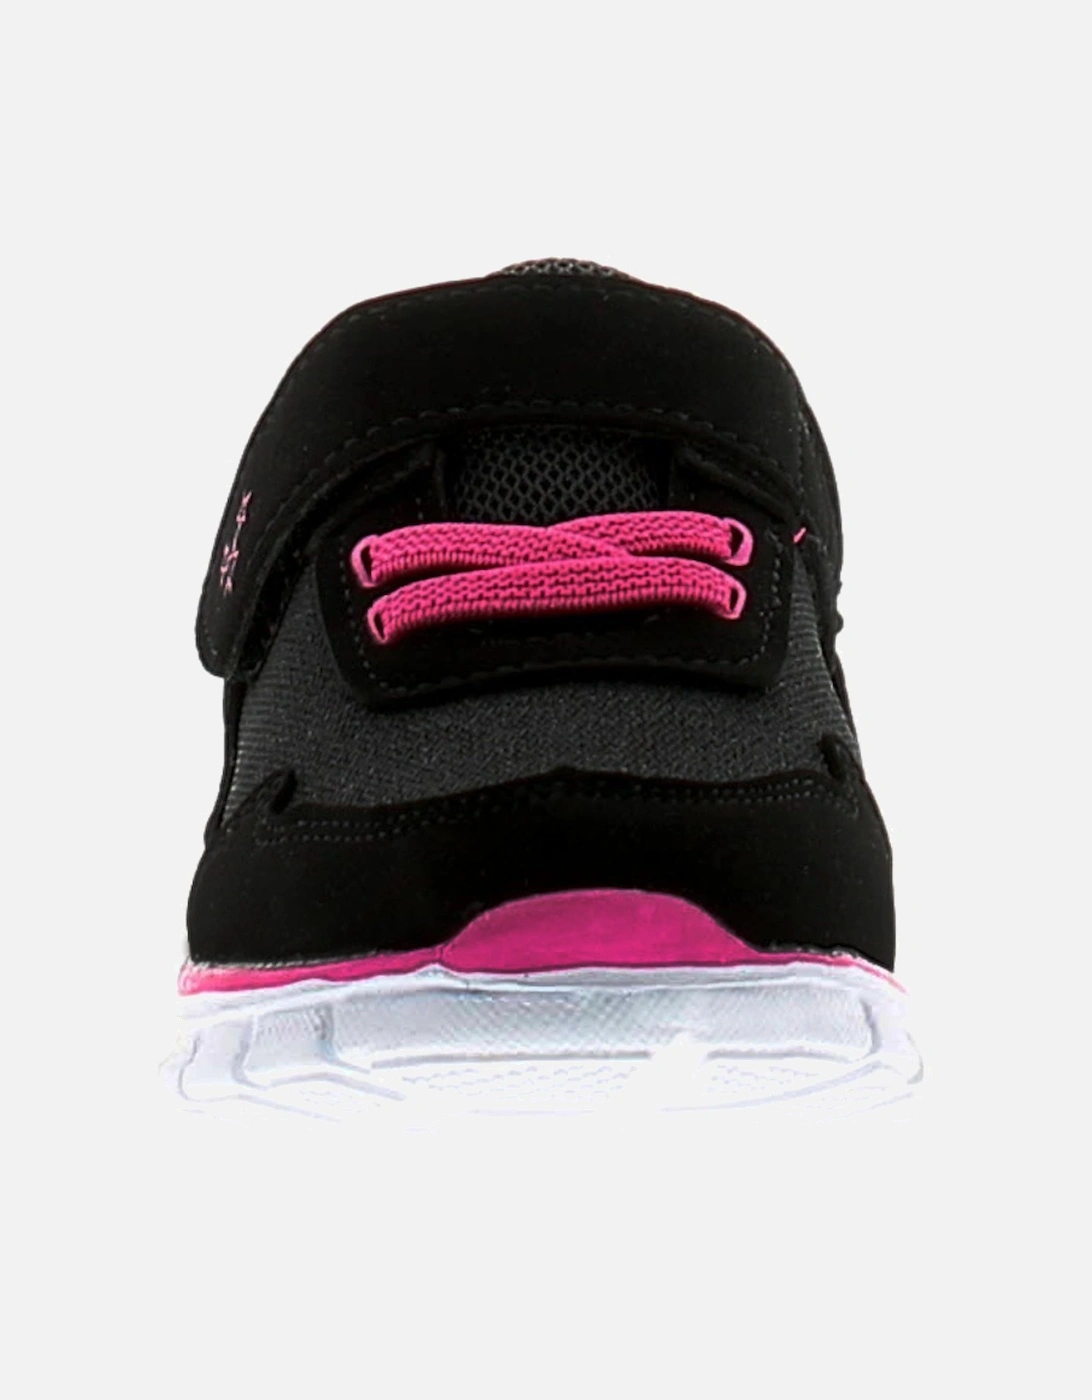 Infants Girls Trainers nina Touch Fastening black pink UK Size